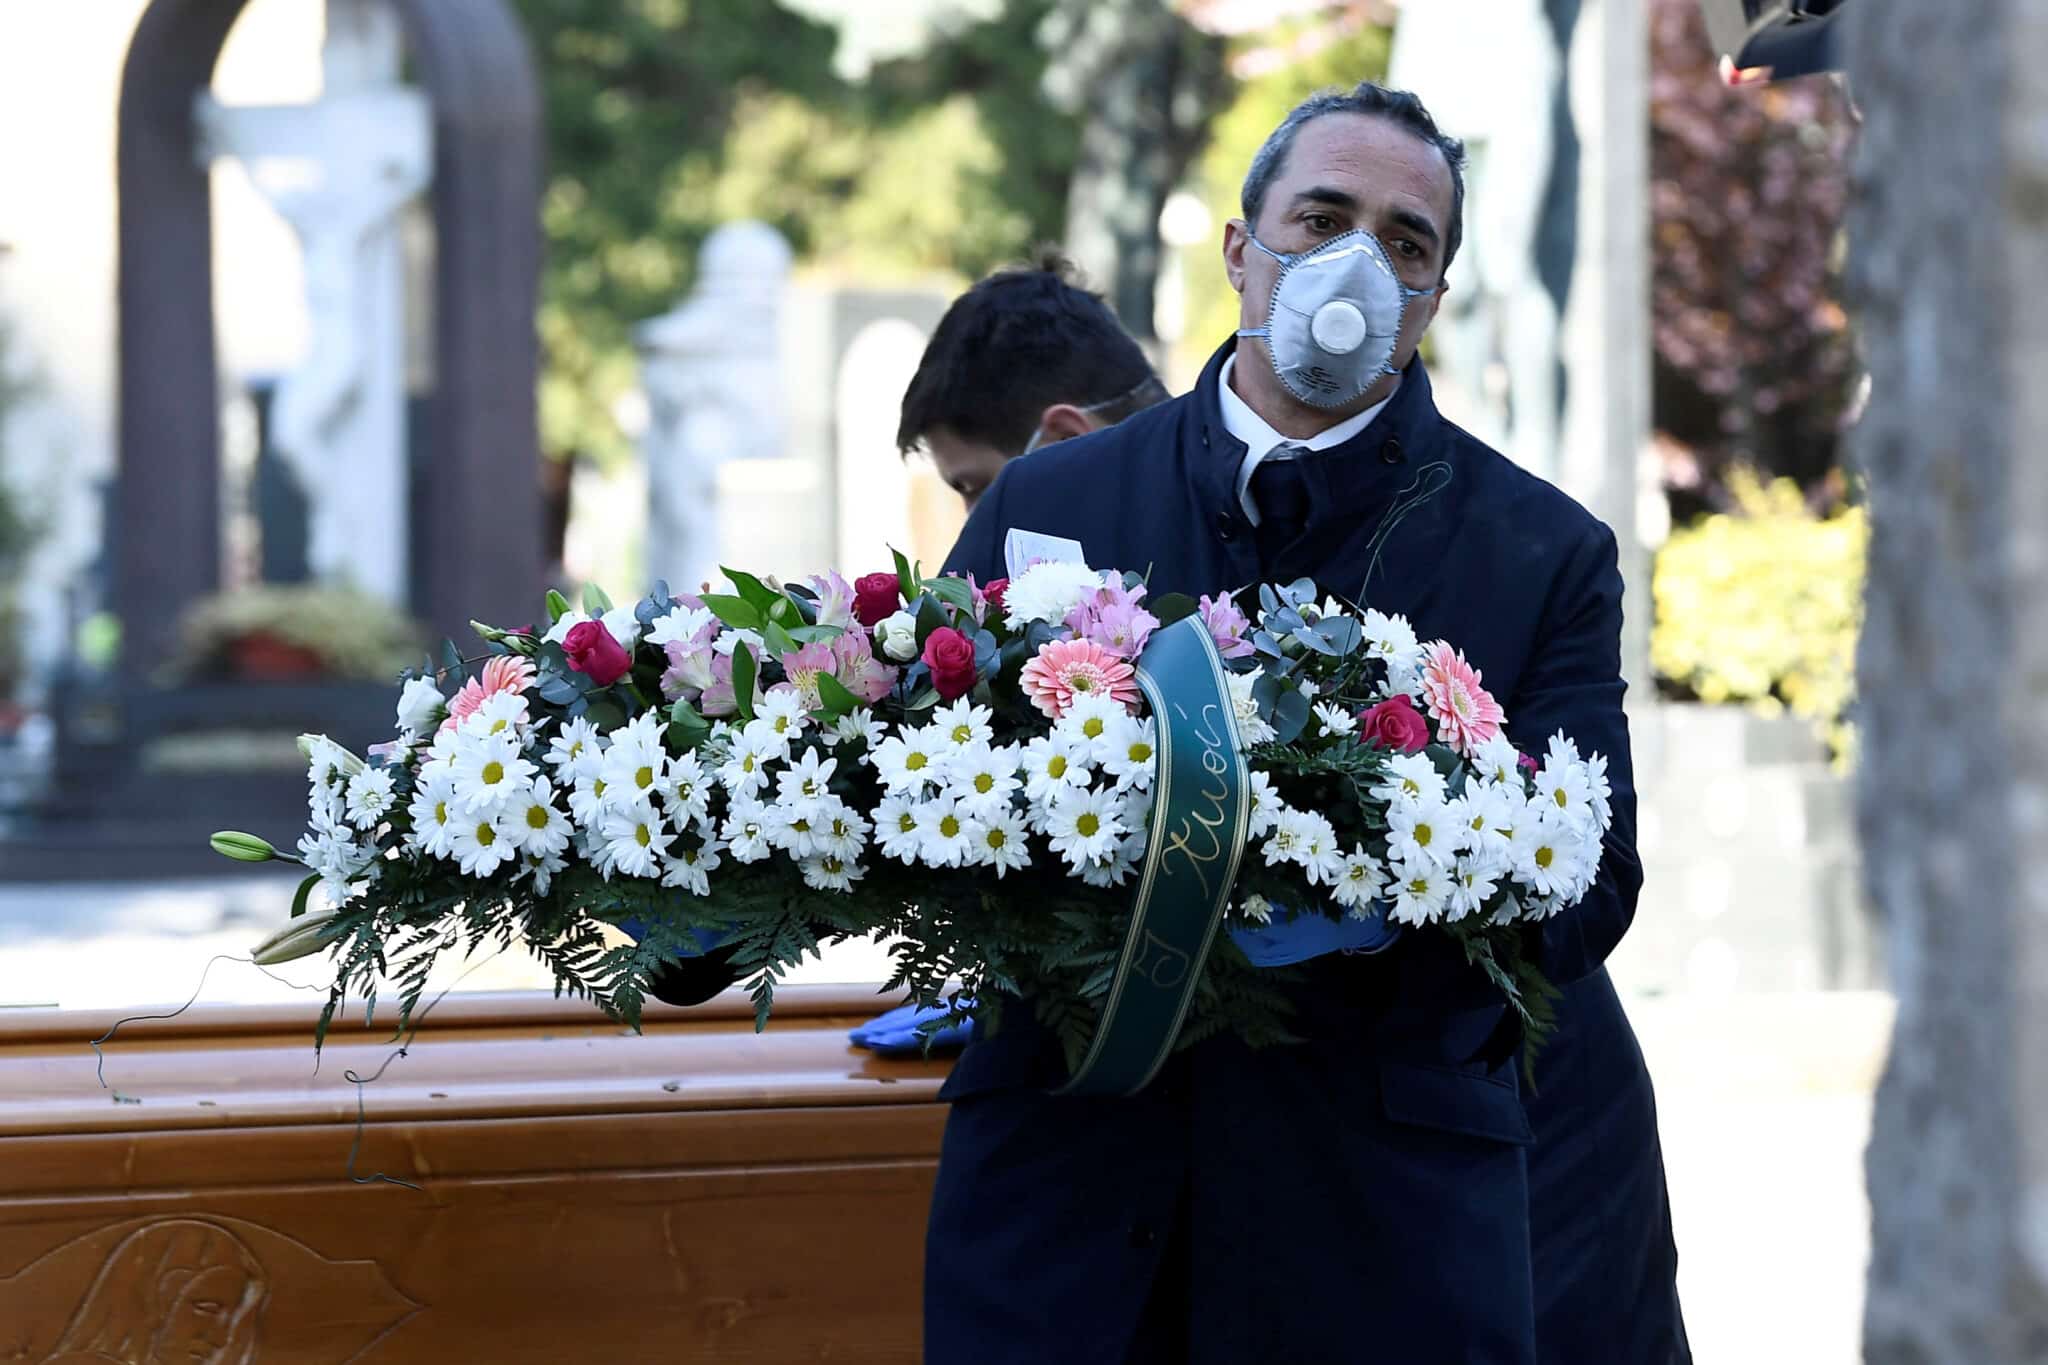 Funeral for a victim of coronavirus in Italy